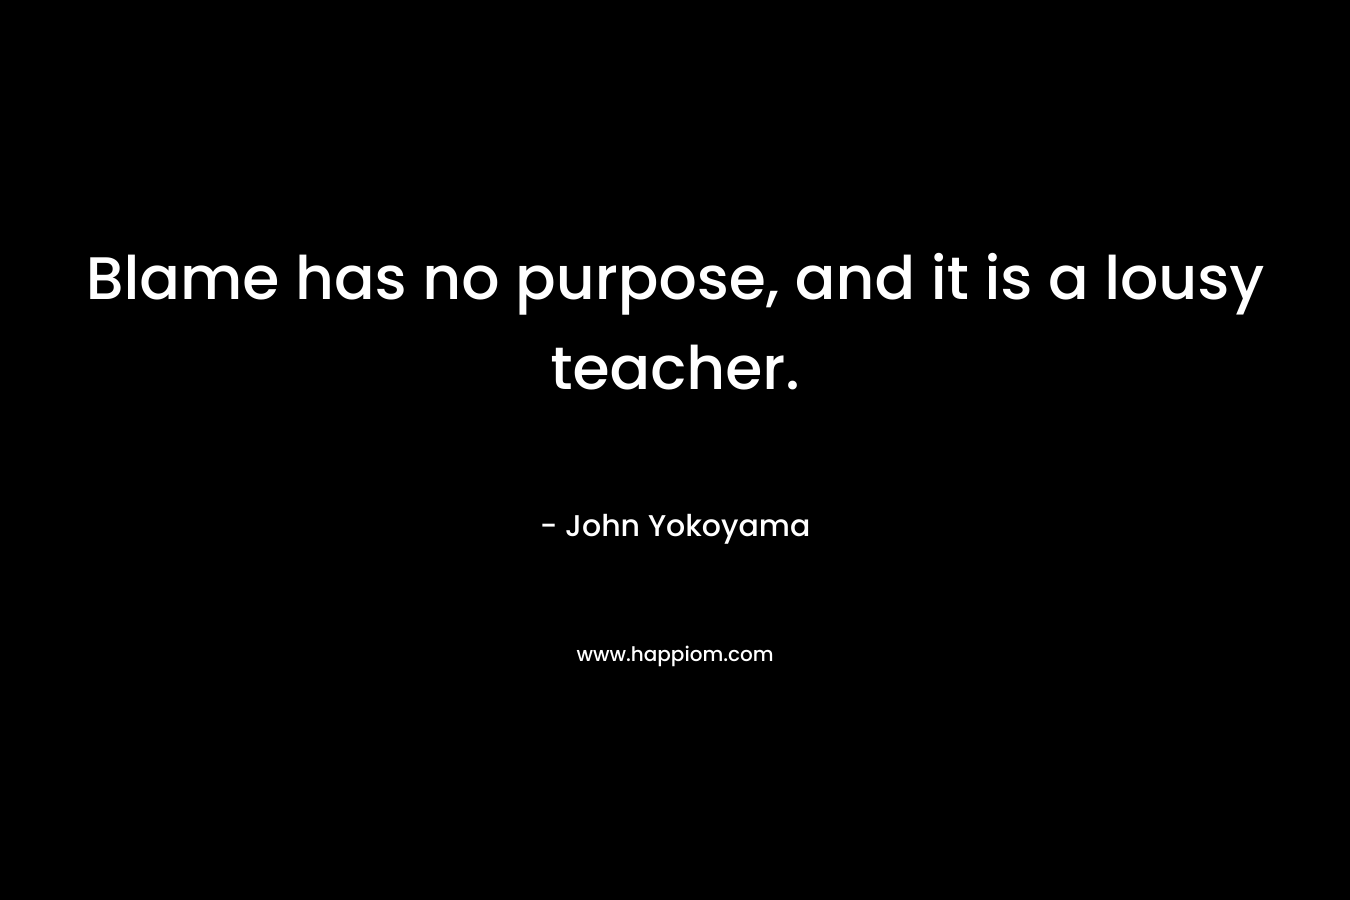 Blame has no purpose, and it is a lousy teacher.